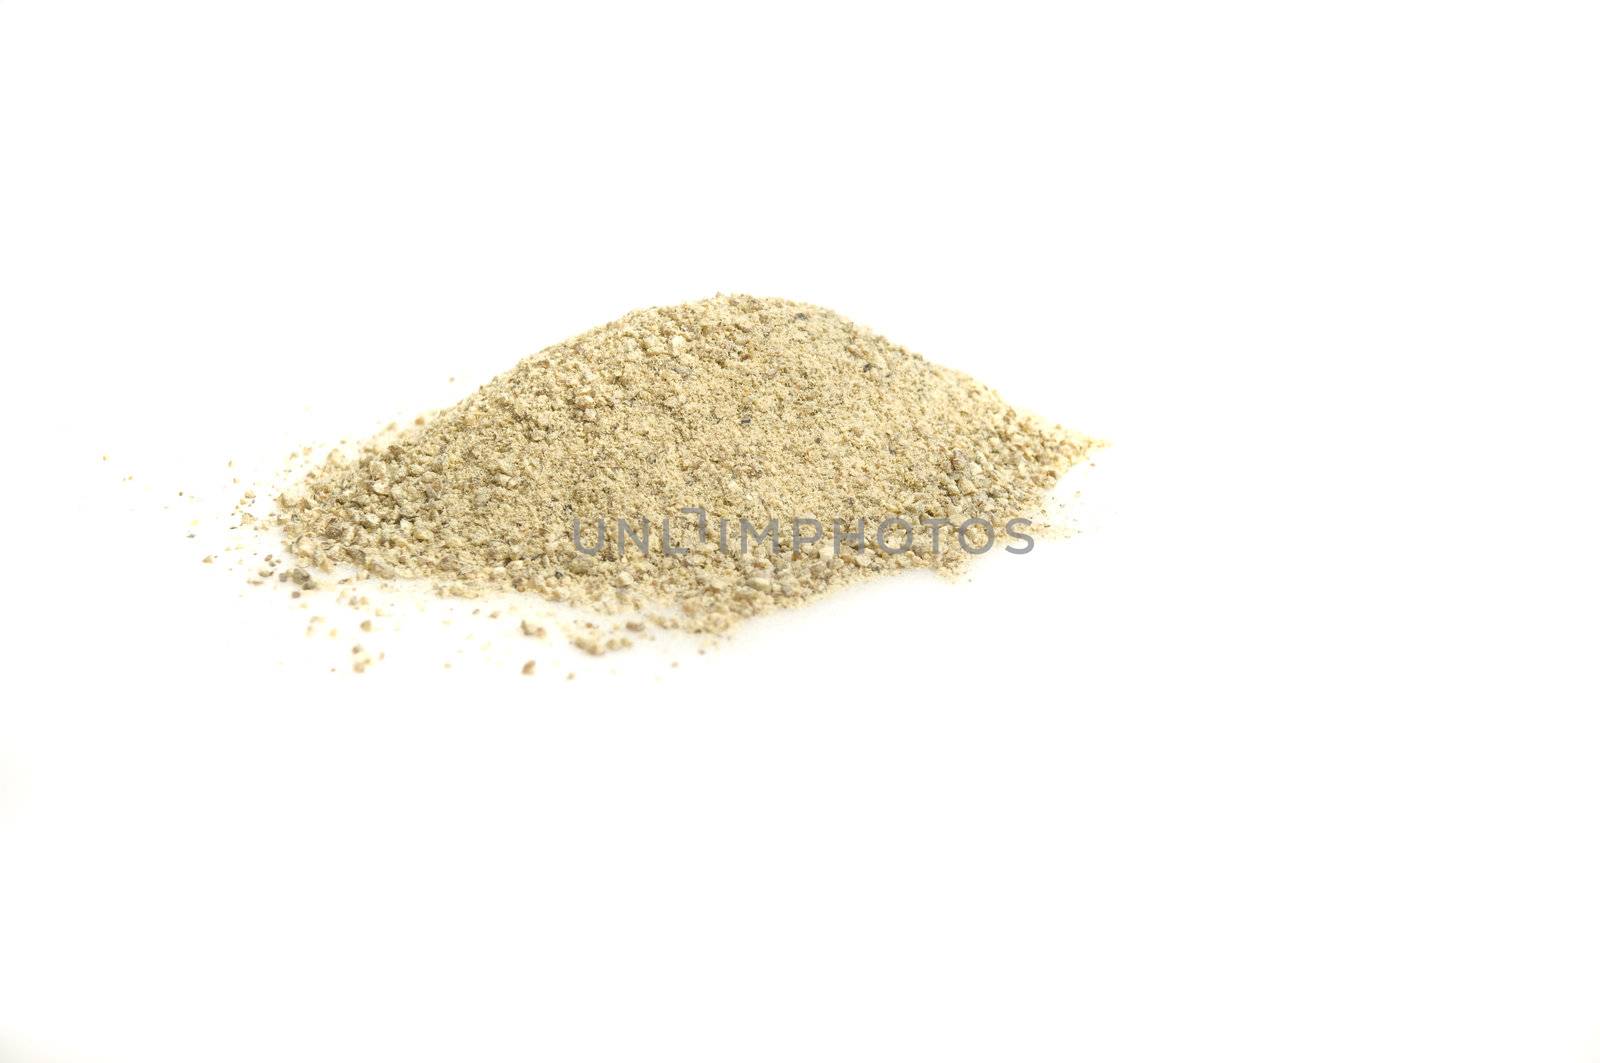 close-up on white pepper powder, isolated on white